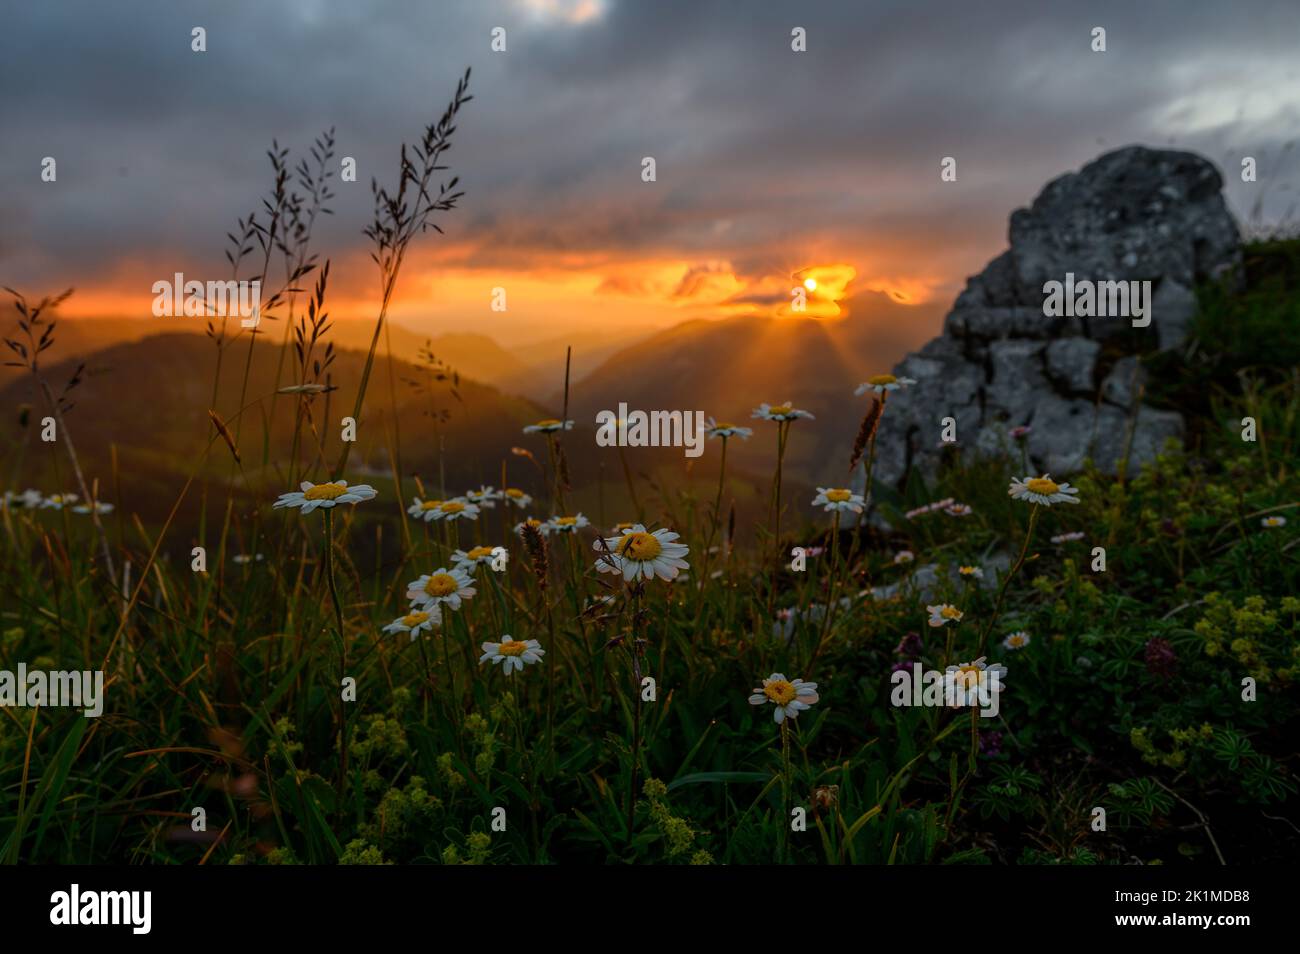 dramatic sunset mood with tyndall effect and flowering daisy flowers in the alpine foothills of Fribourg Stock Photo